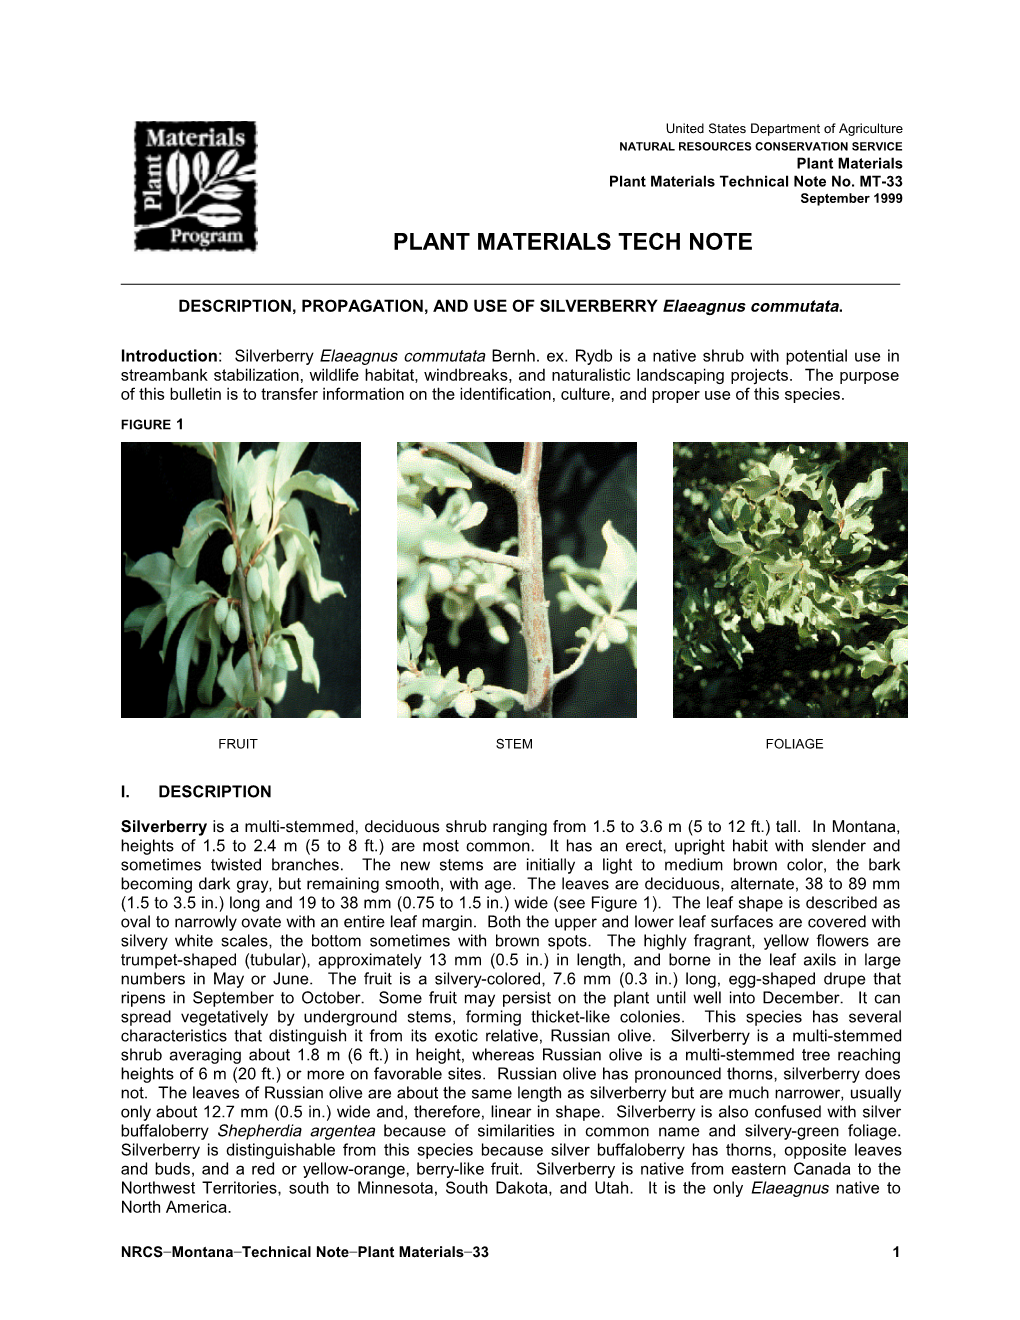 Plant Materials Tech Note